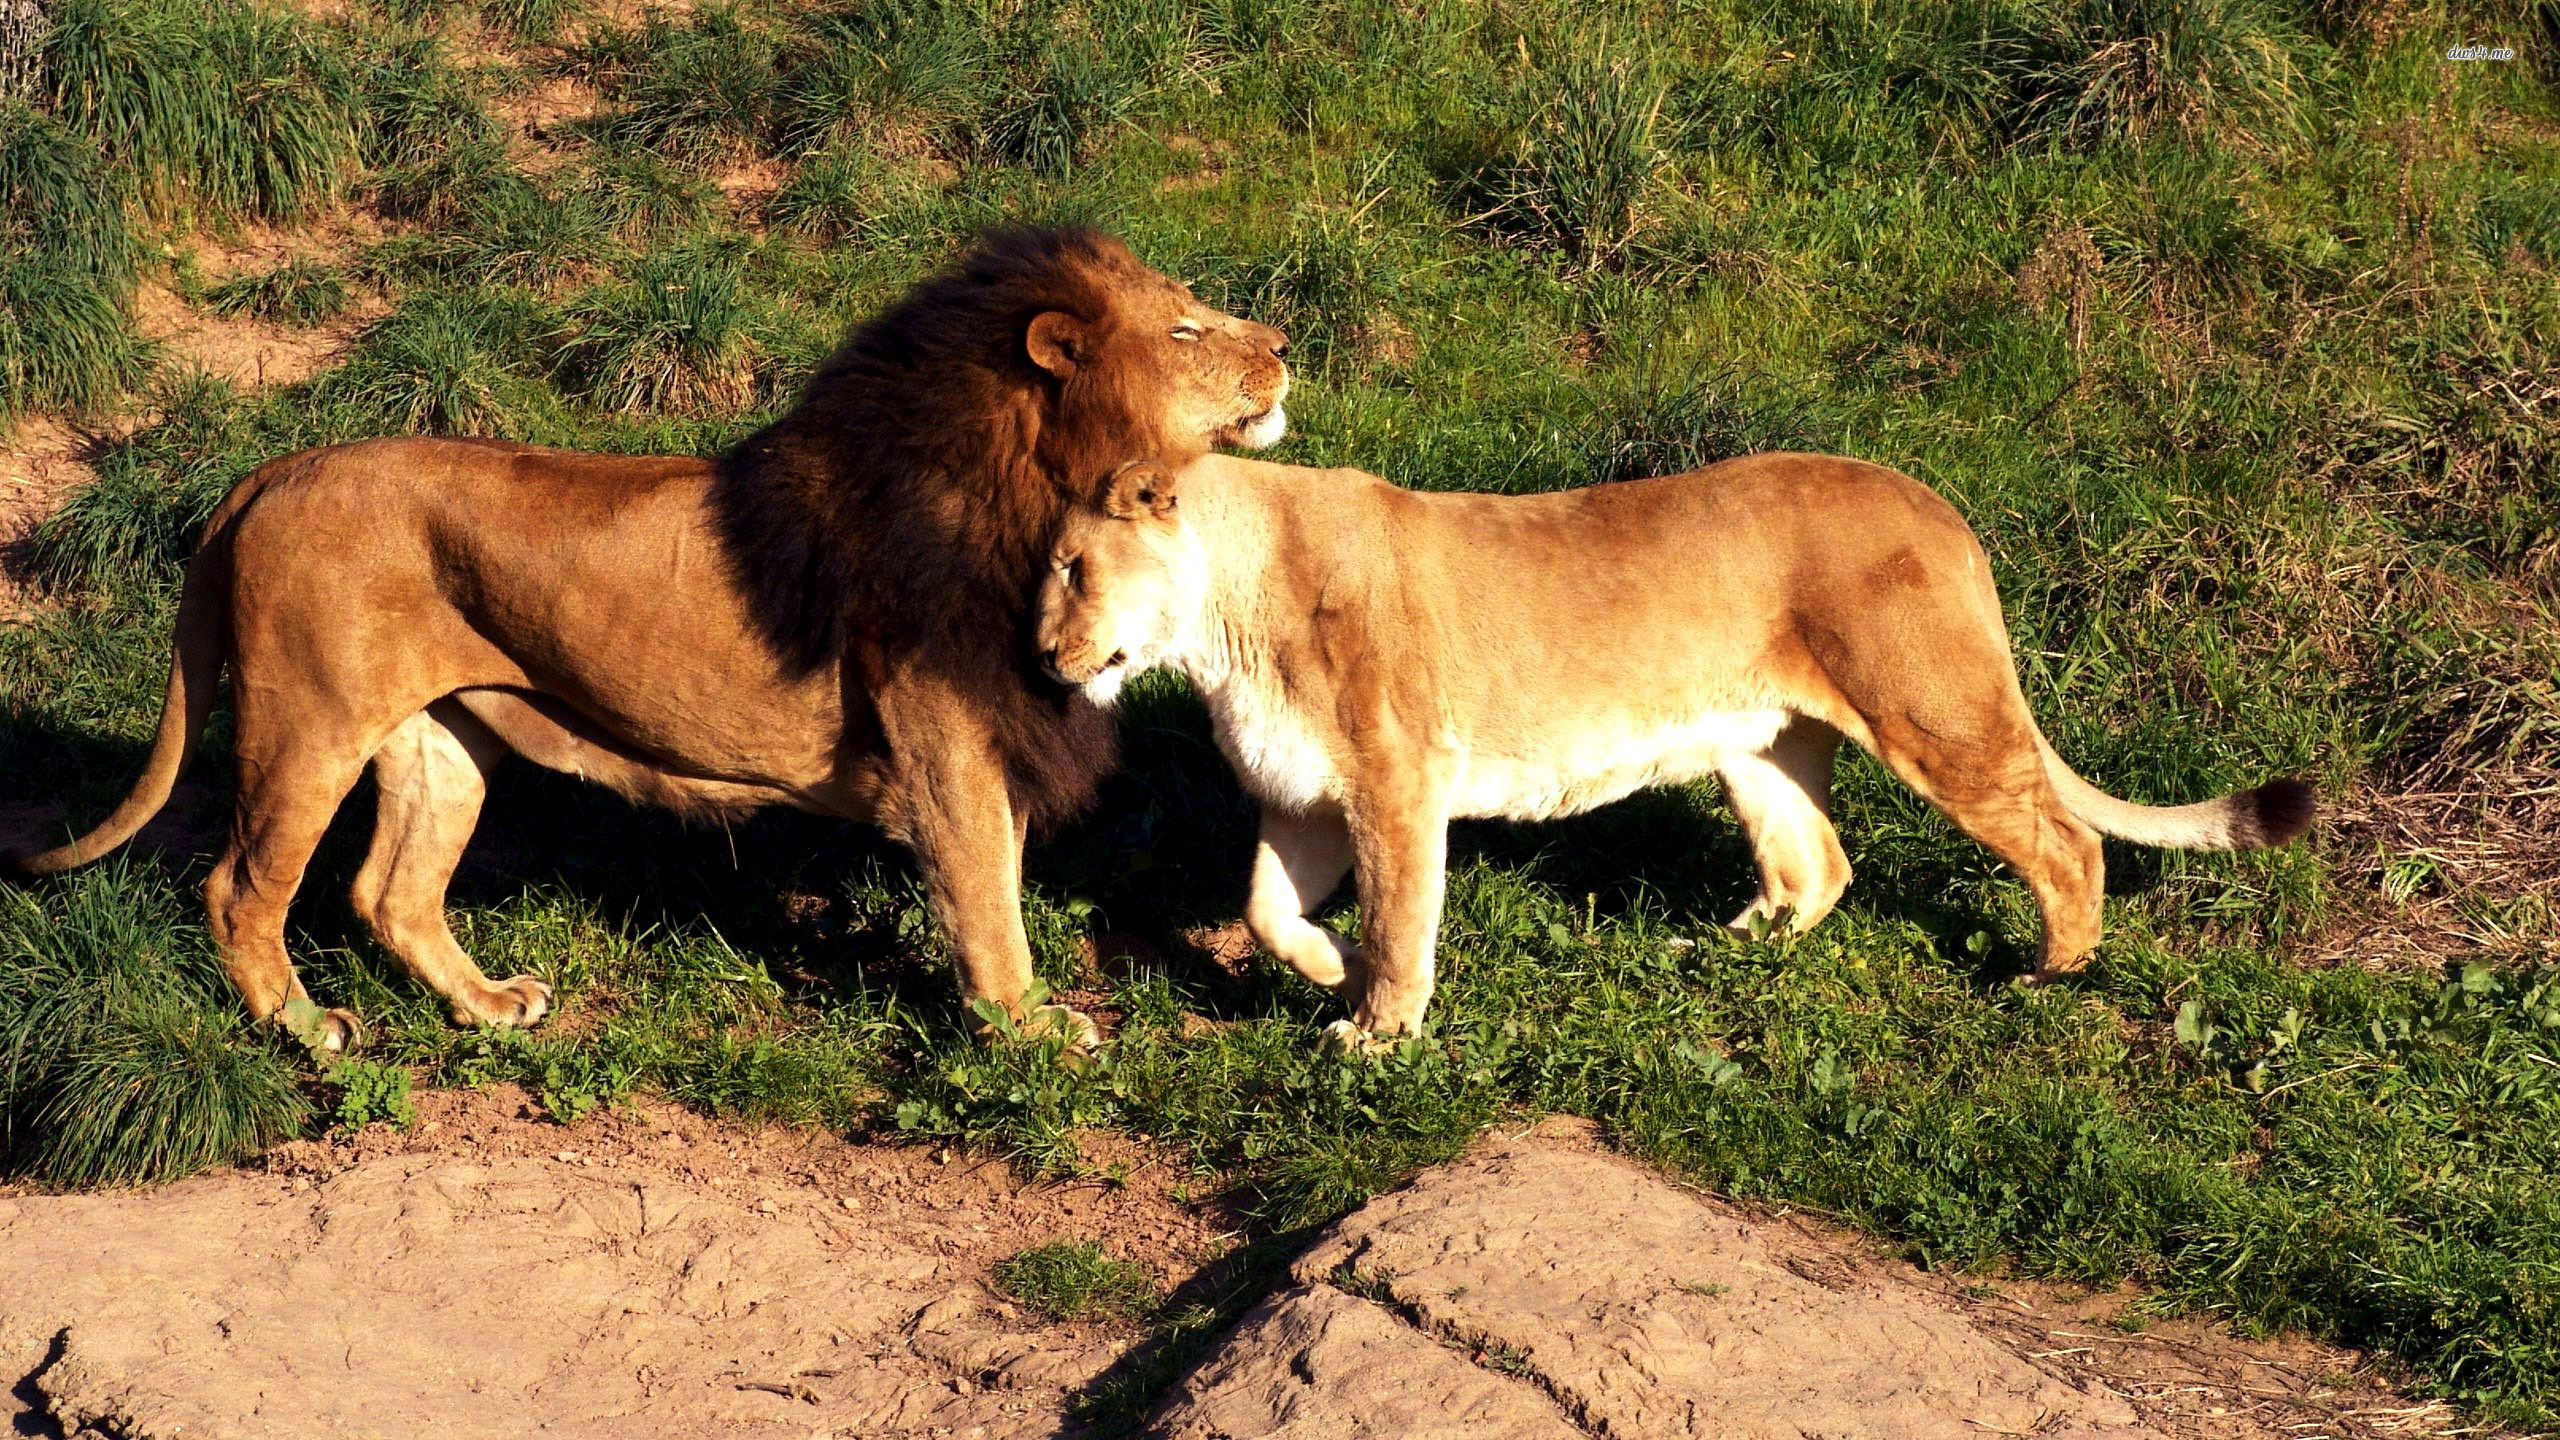 Image Of Lion And Lioness Download